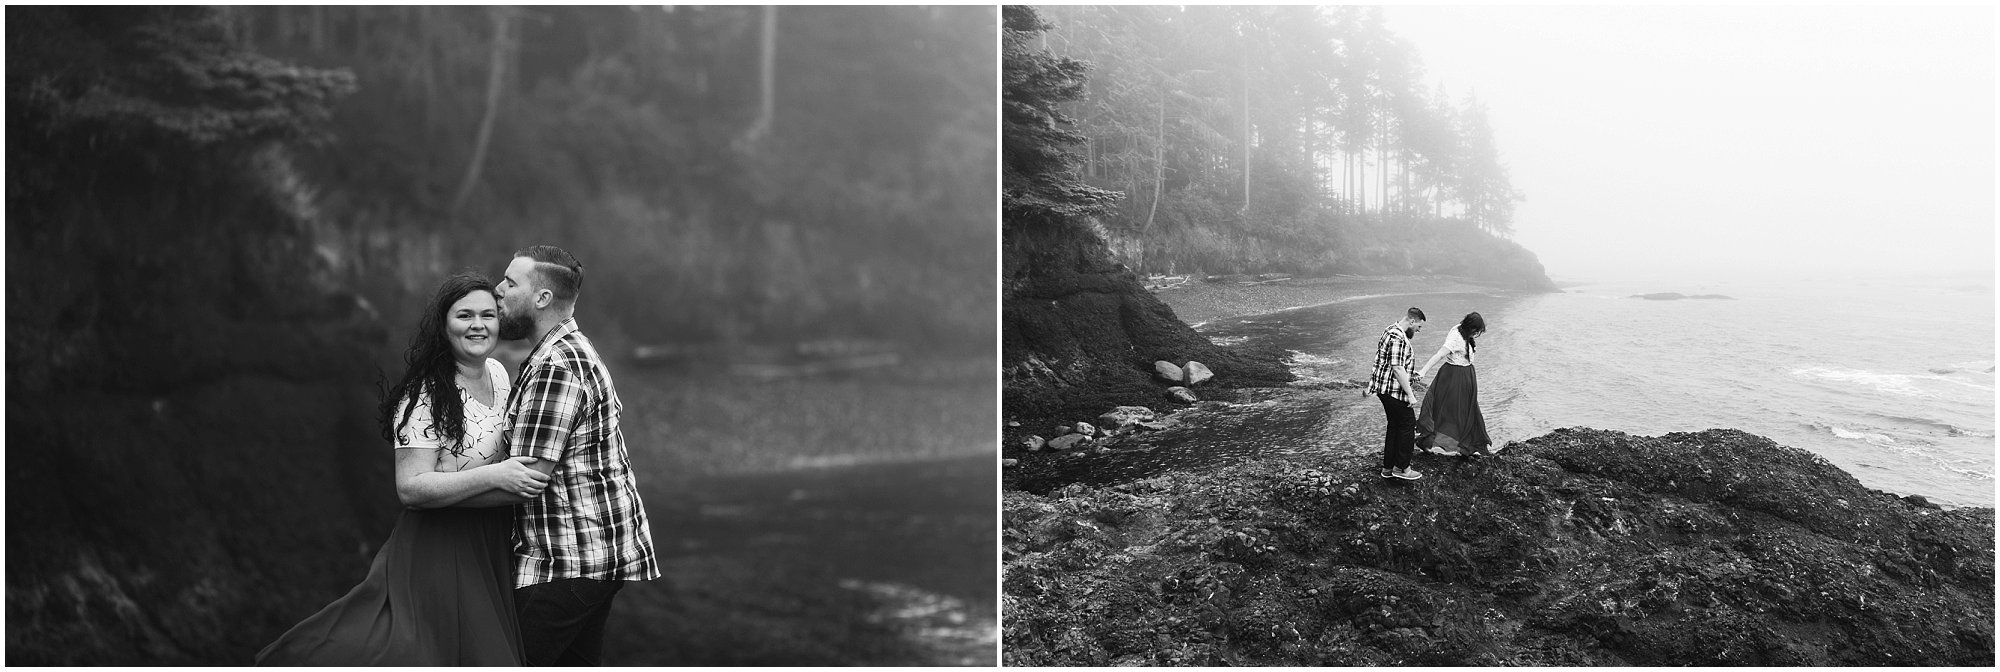 Beautiful moody black and whites from a Washington Coast engagement photo session at Salt Creek Recreation Area in Port Angeles, WA. | Erica Swantek Photography